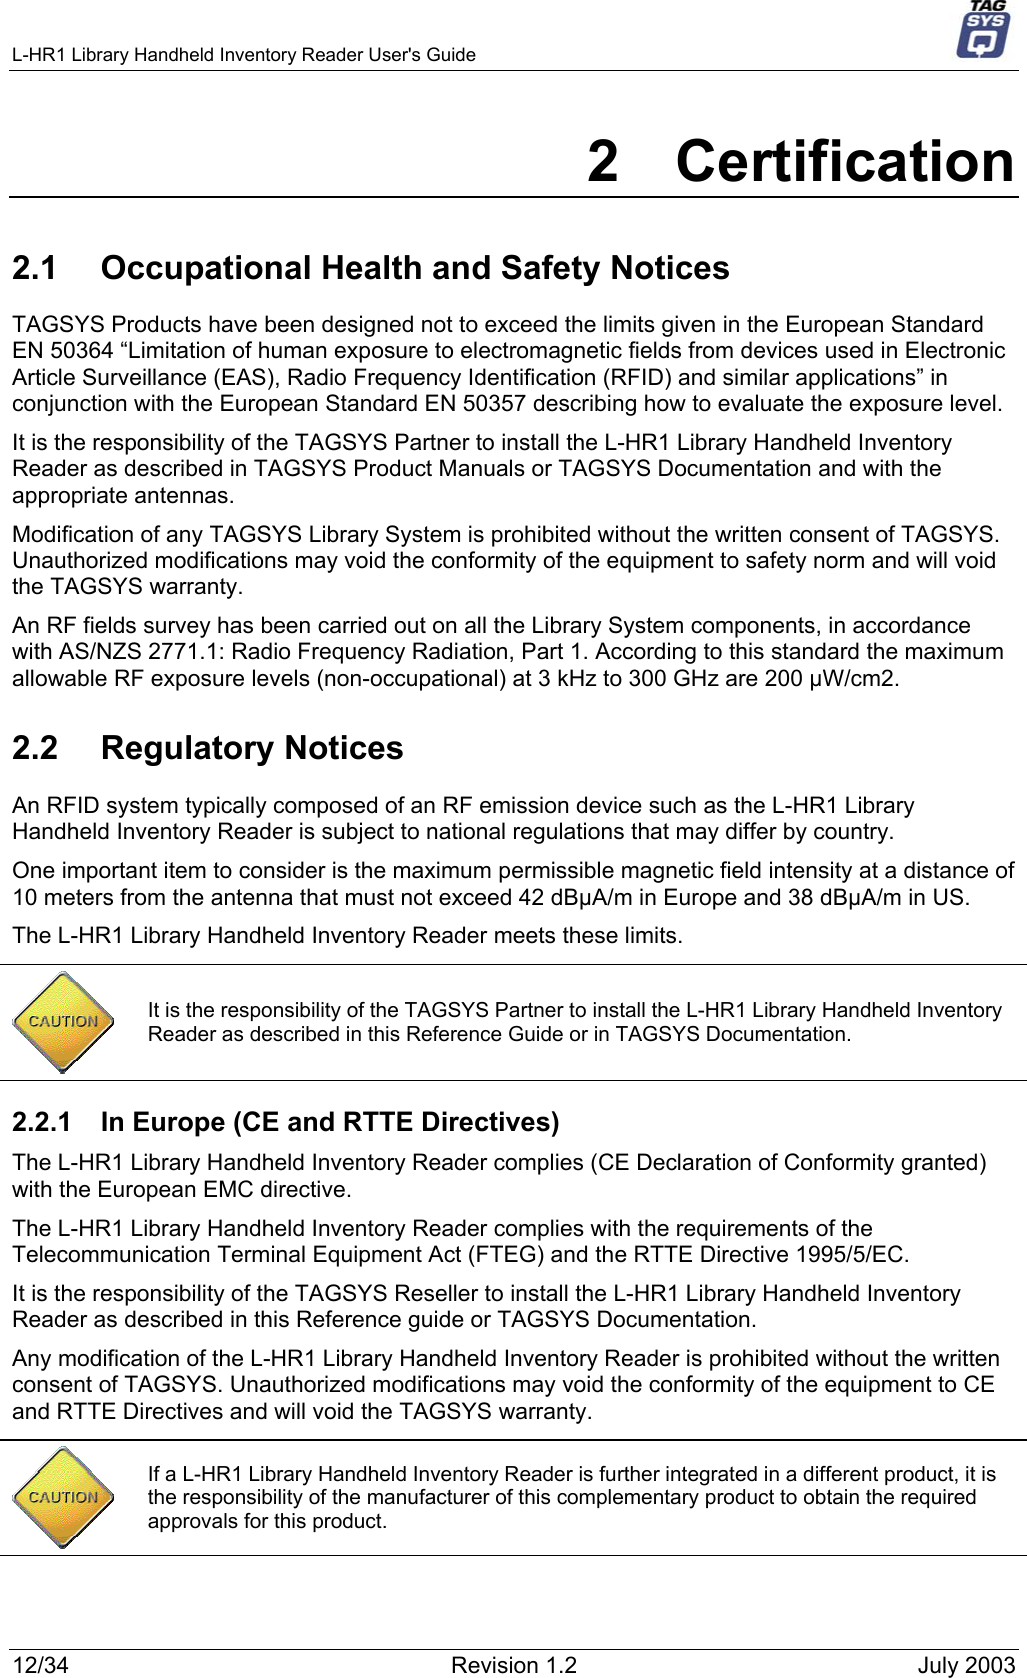 L-HR1 Library Handheld Inventory Reader User&apos;s Guide     2 Certification 2.1  Occupational Health and Safety Notices TAGSYS Products have been designed not to exceed the limits given in the European Standard EN 50364 “Limitation of human exposure to electromagnetic fields from devices used in Electronic Article Surveillance (EAS), Radio Frequency Identification (RFID) and similar applications” in conjunction with the European Standard EN 50357 describing how to evaluate the exposure level. It is the responsibility of the TAGSYS Partner to install the L-HR1 Library Handheld Inventory Reader as described in TAGSYS Product Manuals or TAGSYS Documentation and with the appropriate antennas.  Modification of any TAGSYS Library System is prohibited without the written consent of TAGSYS. Unauthorized modifications may void the conformity of the equipment to safety norm and will void the TAGSYS warranty. An RF fields survey has been carried out on all the Library System components, in accordance with AS/NZS 2771.1: Radio Frequency Radiation, Part 1. According to this standard the maximum allowable RF exposure levels (non-occupational) at 3 kHz to 300 GHz are 200 µW/cm2.  2.2 Regulatory Notices An RFID system typically composed of an RF emission device such as the L-HR1 Library Handheld Inventory Reader is subject to national regulations that may differ by country. One important item to consider is the maximum permissible magnetic field intensity at a distance of 10 meters from the antenna that must not exceed 42 dBµA/m in Europe and 38 dBµA/m in US. The L-HR1 Library Handheld Inventory Reader meets these limits.  It is the responsibility of the TAGSYS Partner to install the L-HR1 Library Handheld Inventory Reader as described in this Reference Guide or in TAGSYS Documentation. 2.2.1  In Europe (CE and RTTE Directives)  The L-HR1 Library Handheld Inventory Reader complies (CE Declaration of Conformity granted) with the European EMC directive. The L-HR1 Library Handheld Inventory Reader complies with the requirements of the Telecommunication Terminal Equipment Act (FTEG) and the RTTE Directive 1995/5/EC. It is the responsibility of the TAGSYS Reseller to install the L-HR1 Library Handheld Inventory Reader as described in this Reference guide or TAGSYS Documentation. Any modification of the L-HR1 Library Handheld Inventory Reader is prohibited without the written consent of TAGSYS. Unauthorized modifications may void the conformity of the equipment to CE and RTTE Directives and will void the TAGSYS warranty.   If a L-HR1 Library Handheld Inventory Reader is further integrated in a different product, it is the responsibility of the manufacturer of this complementary product to obtain the required approvals for this product. 12/34  Revision 1.2  July 2003 